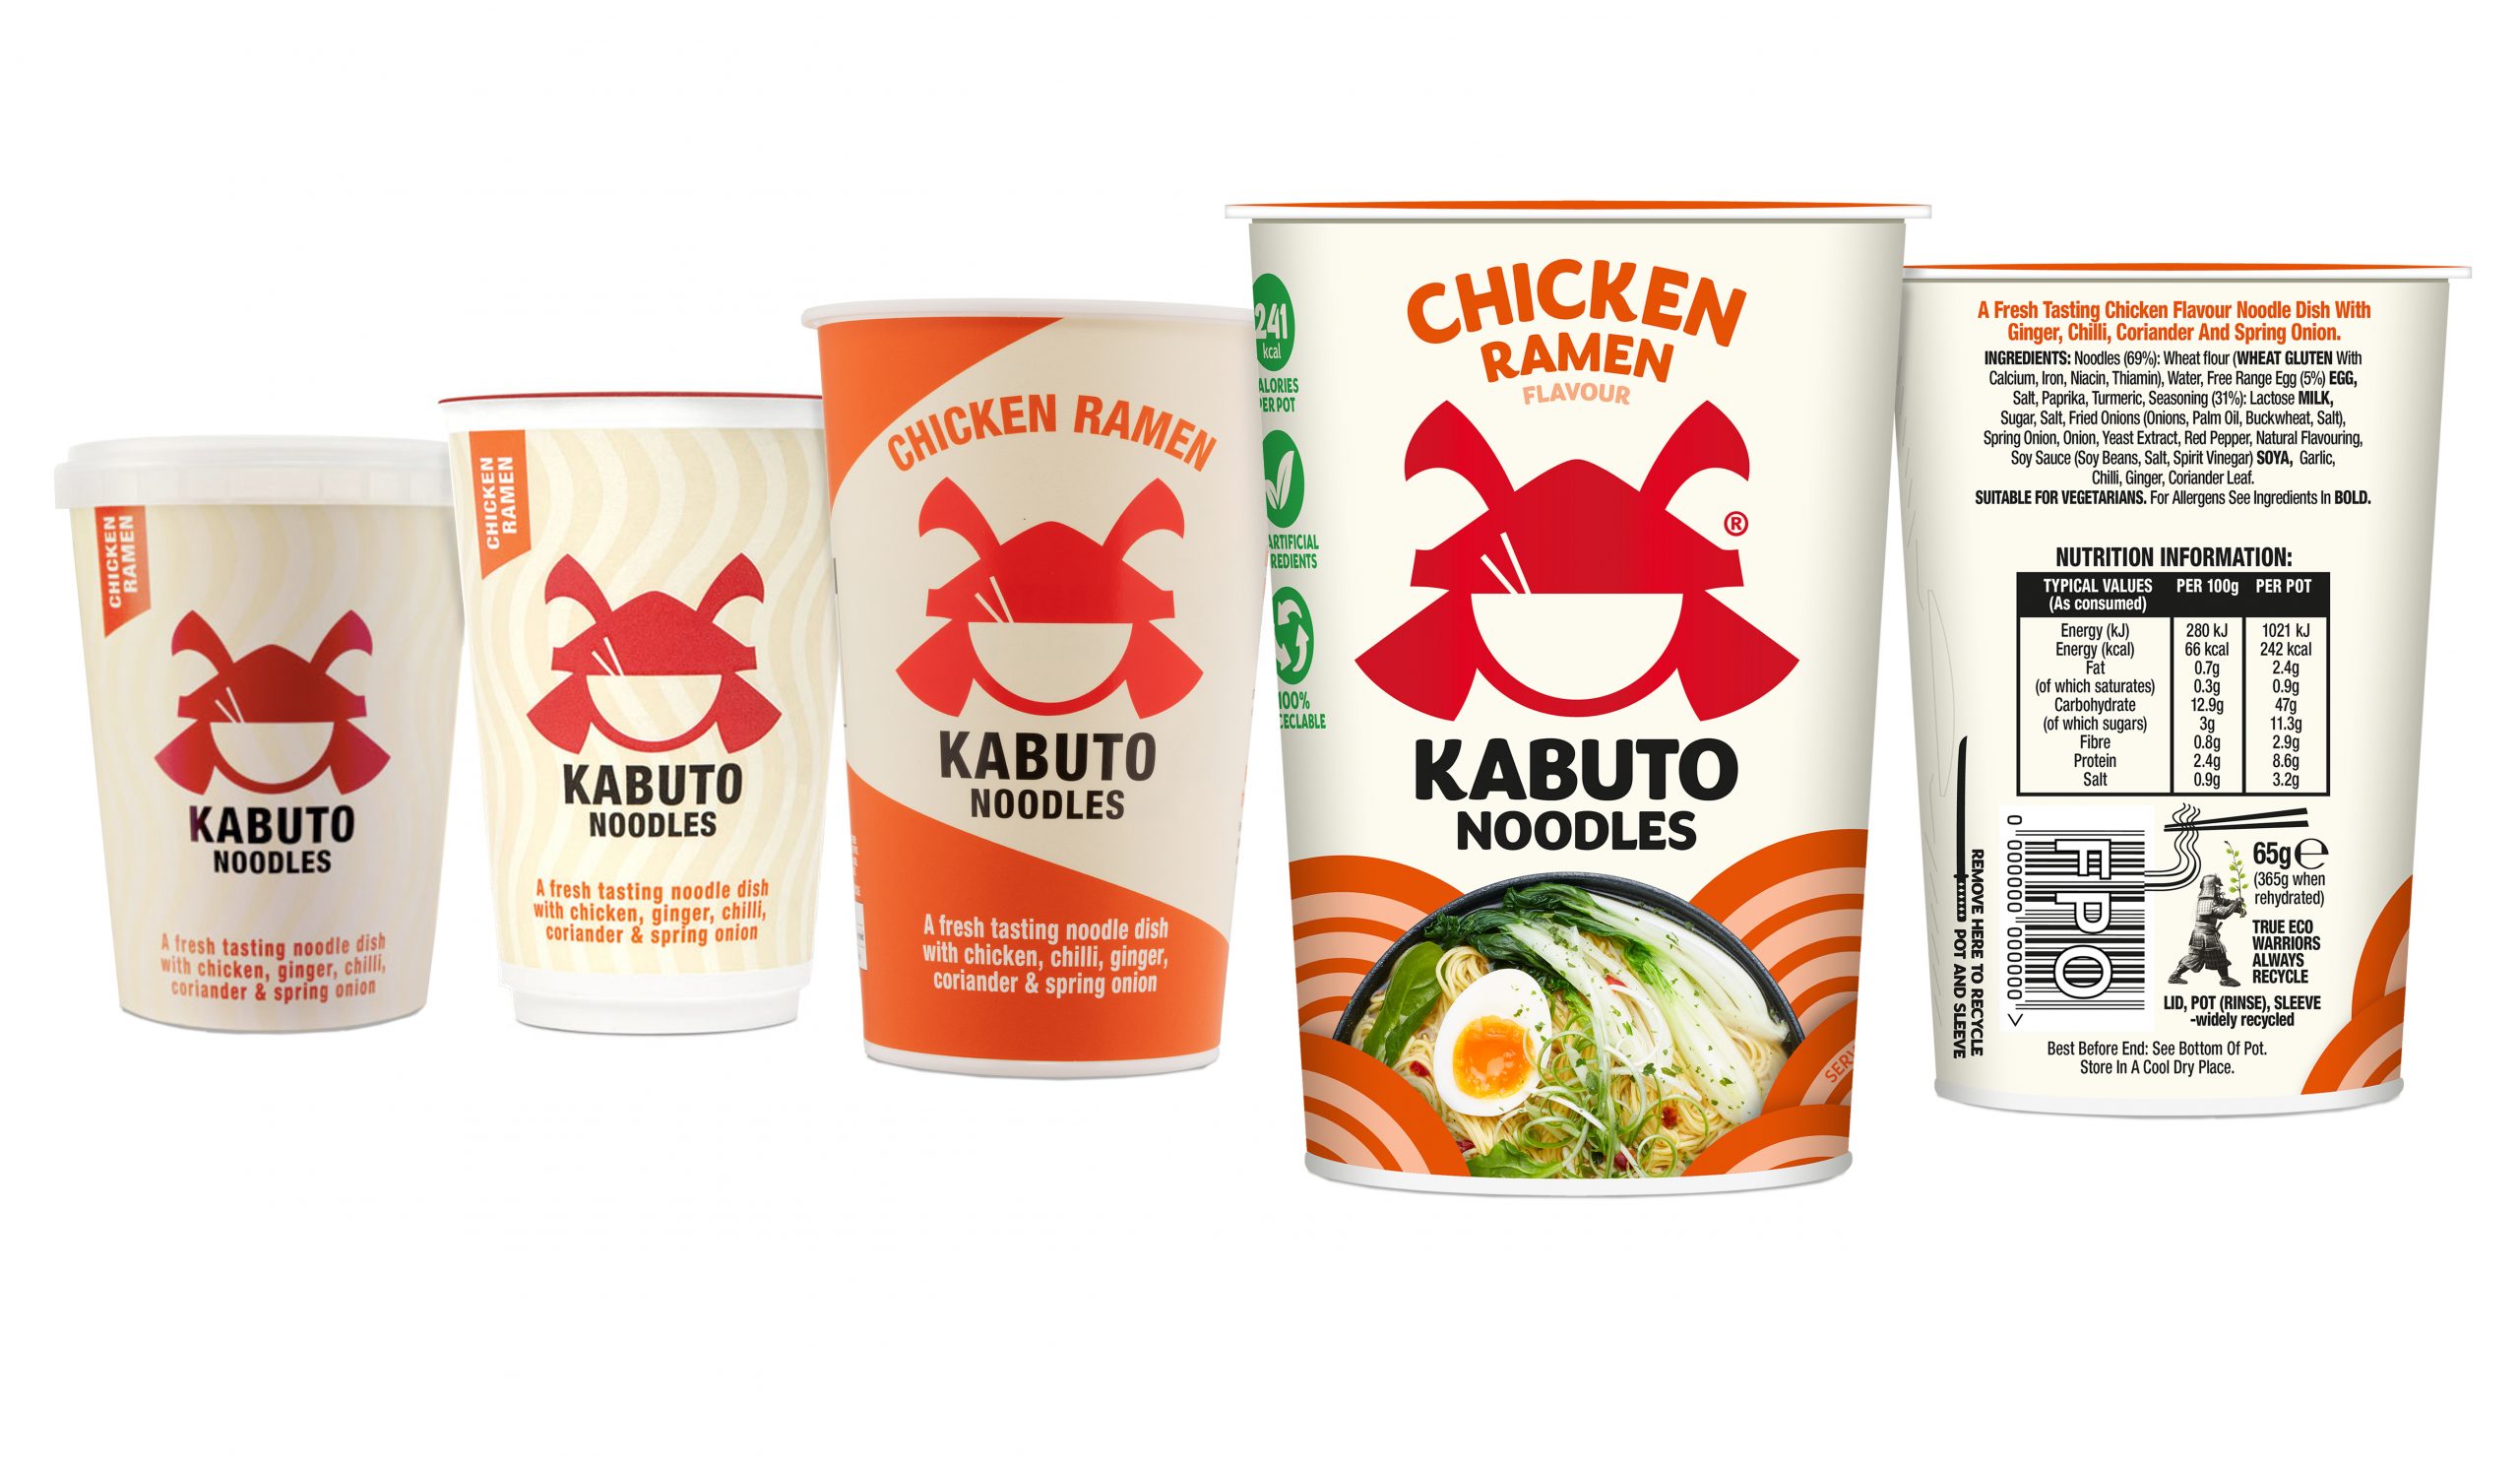 Kabuto Noodles’ unveils category-leading recyclable packaging